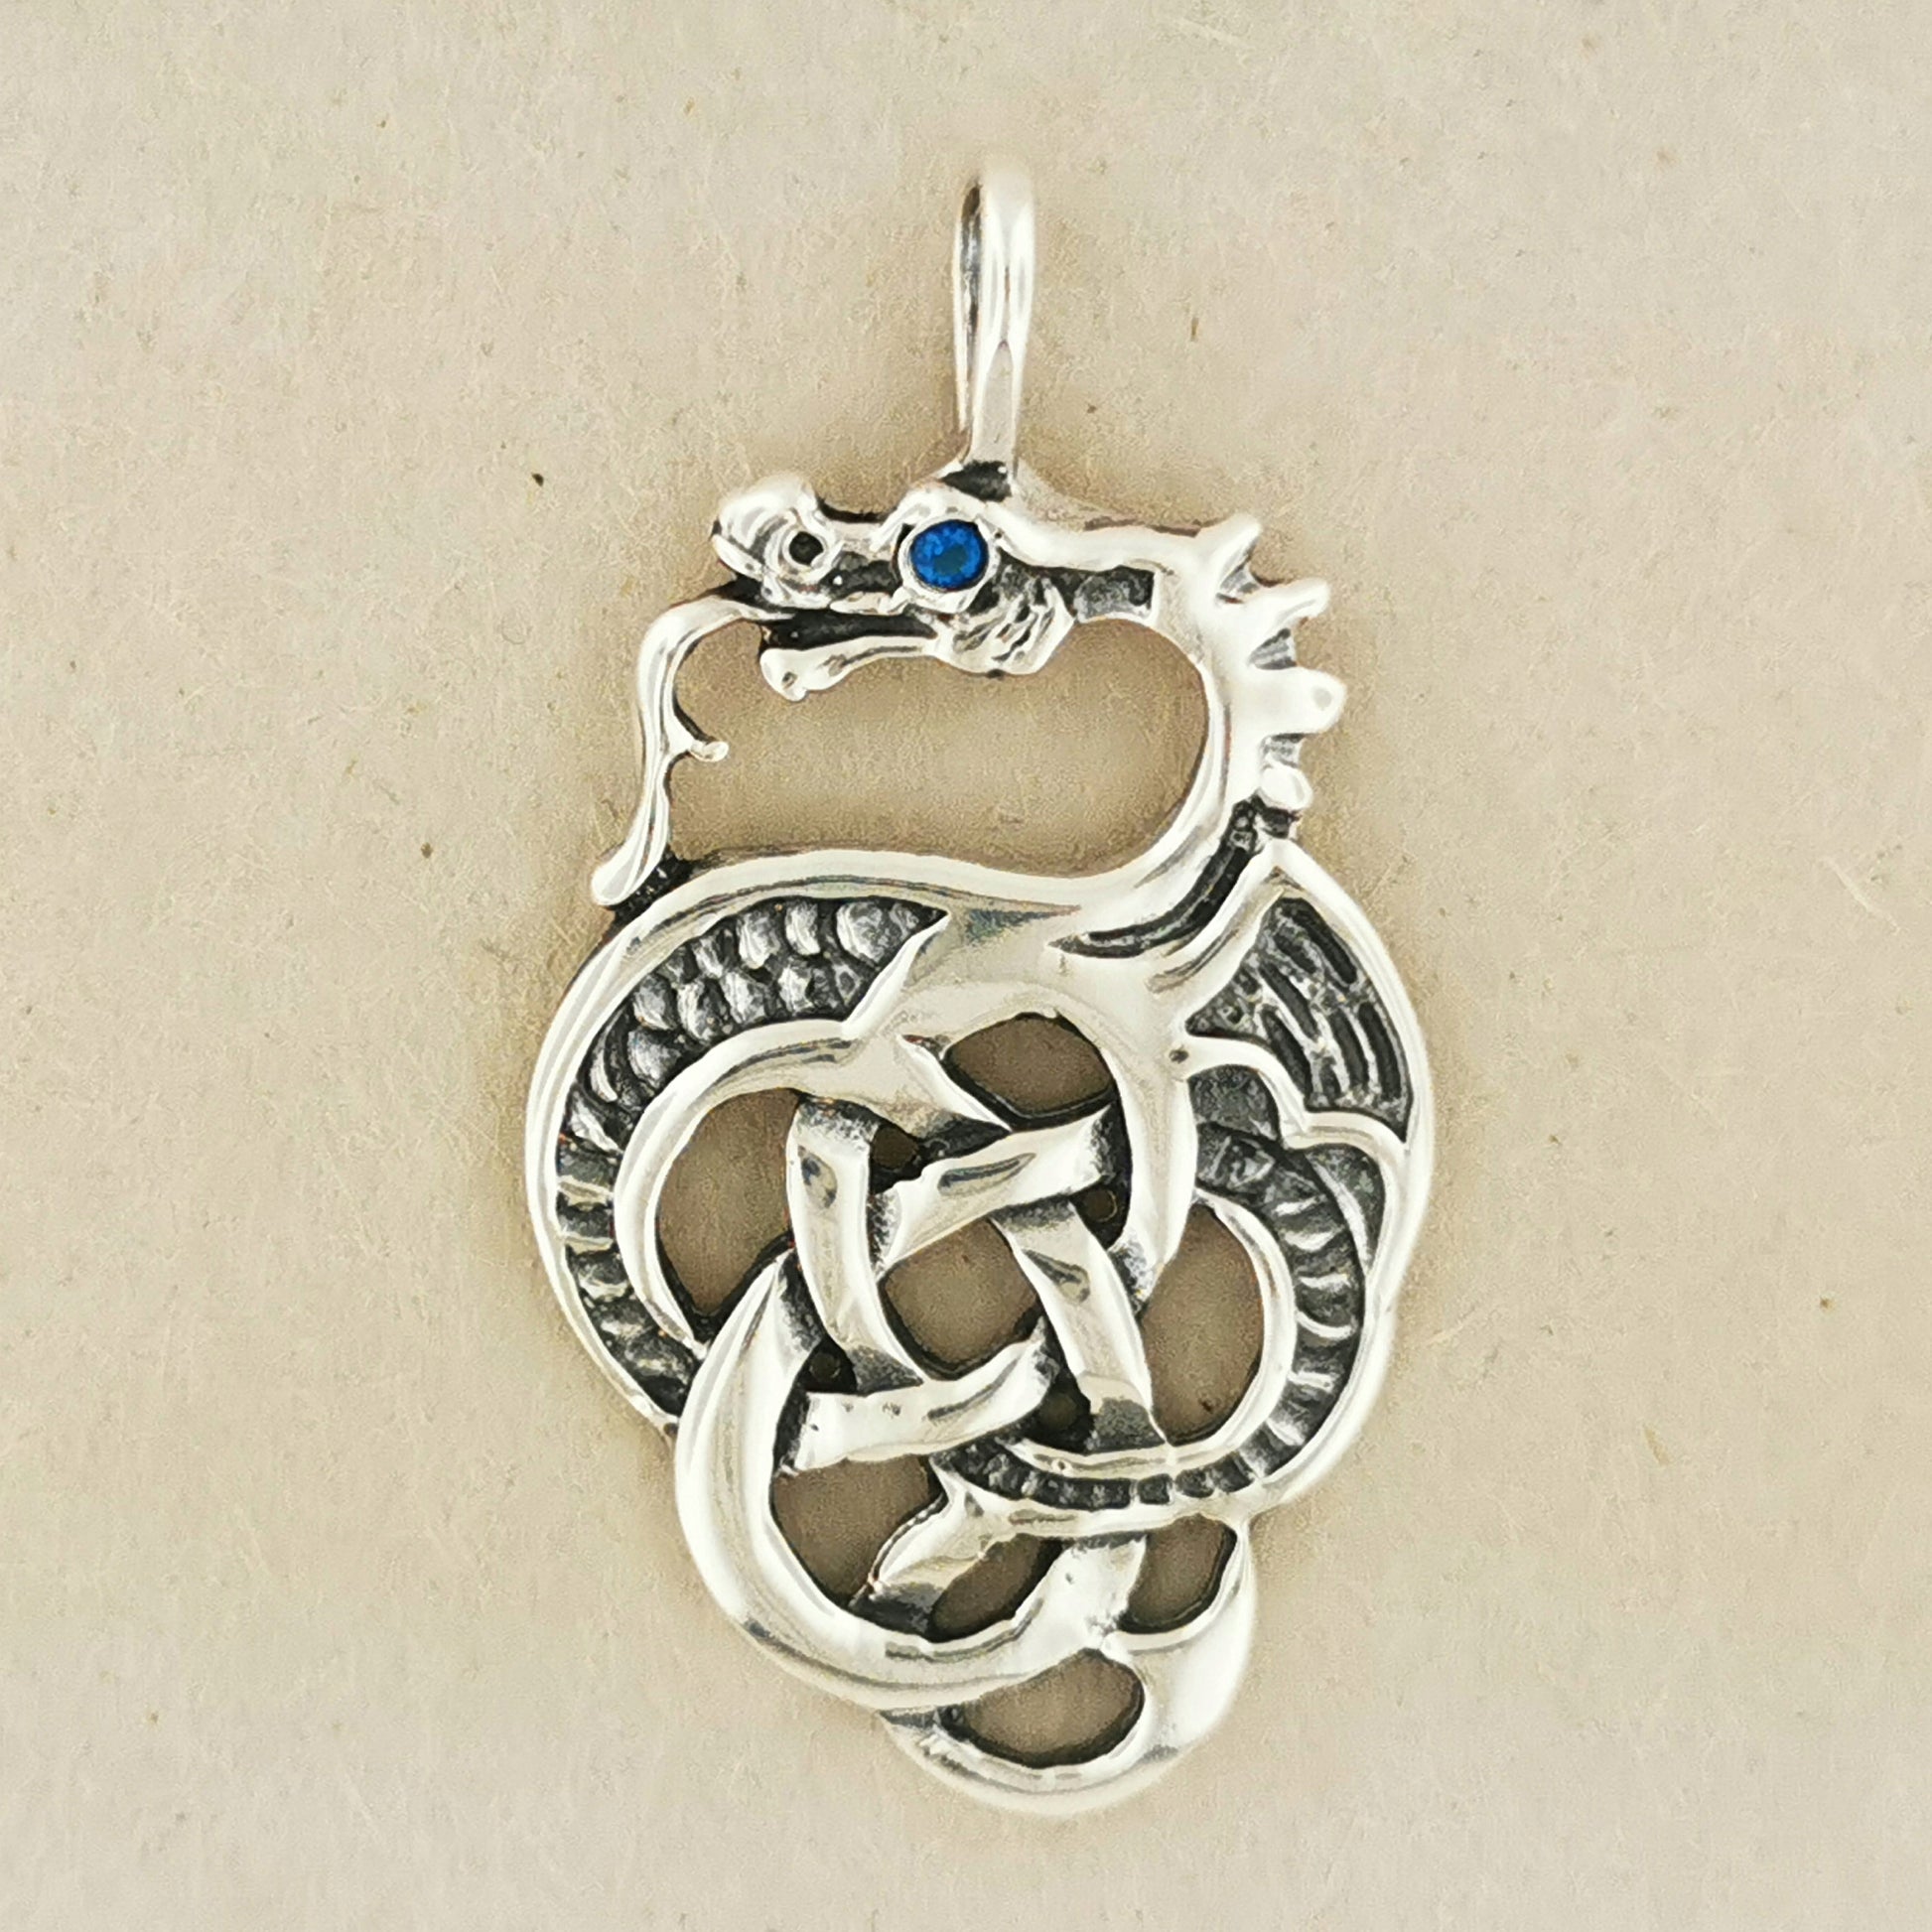 Celtic Knotwork Dragon in Sterling Silver with Gemstone Eye, Gemstone Dragon Pendant, Gemstone Dragon Jewelry, Celtic Sterling Silver Pendant, Sterling Silver Dragon Pendant, Silver Dragon Jewelry, Celtic Dragon Pendant, Celtic Knotwork Pendant